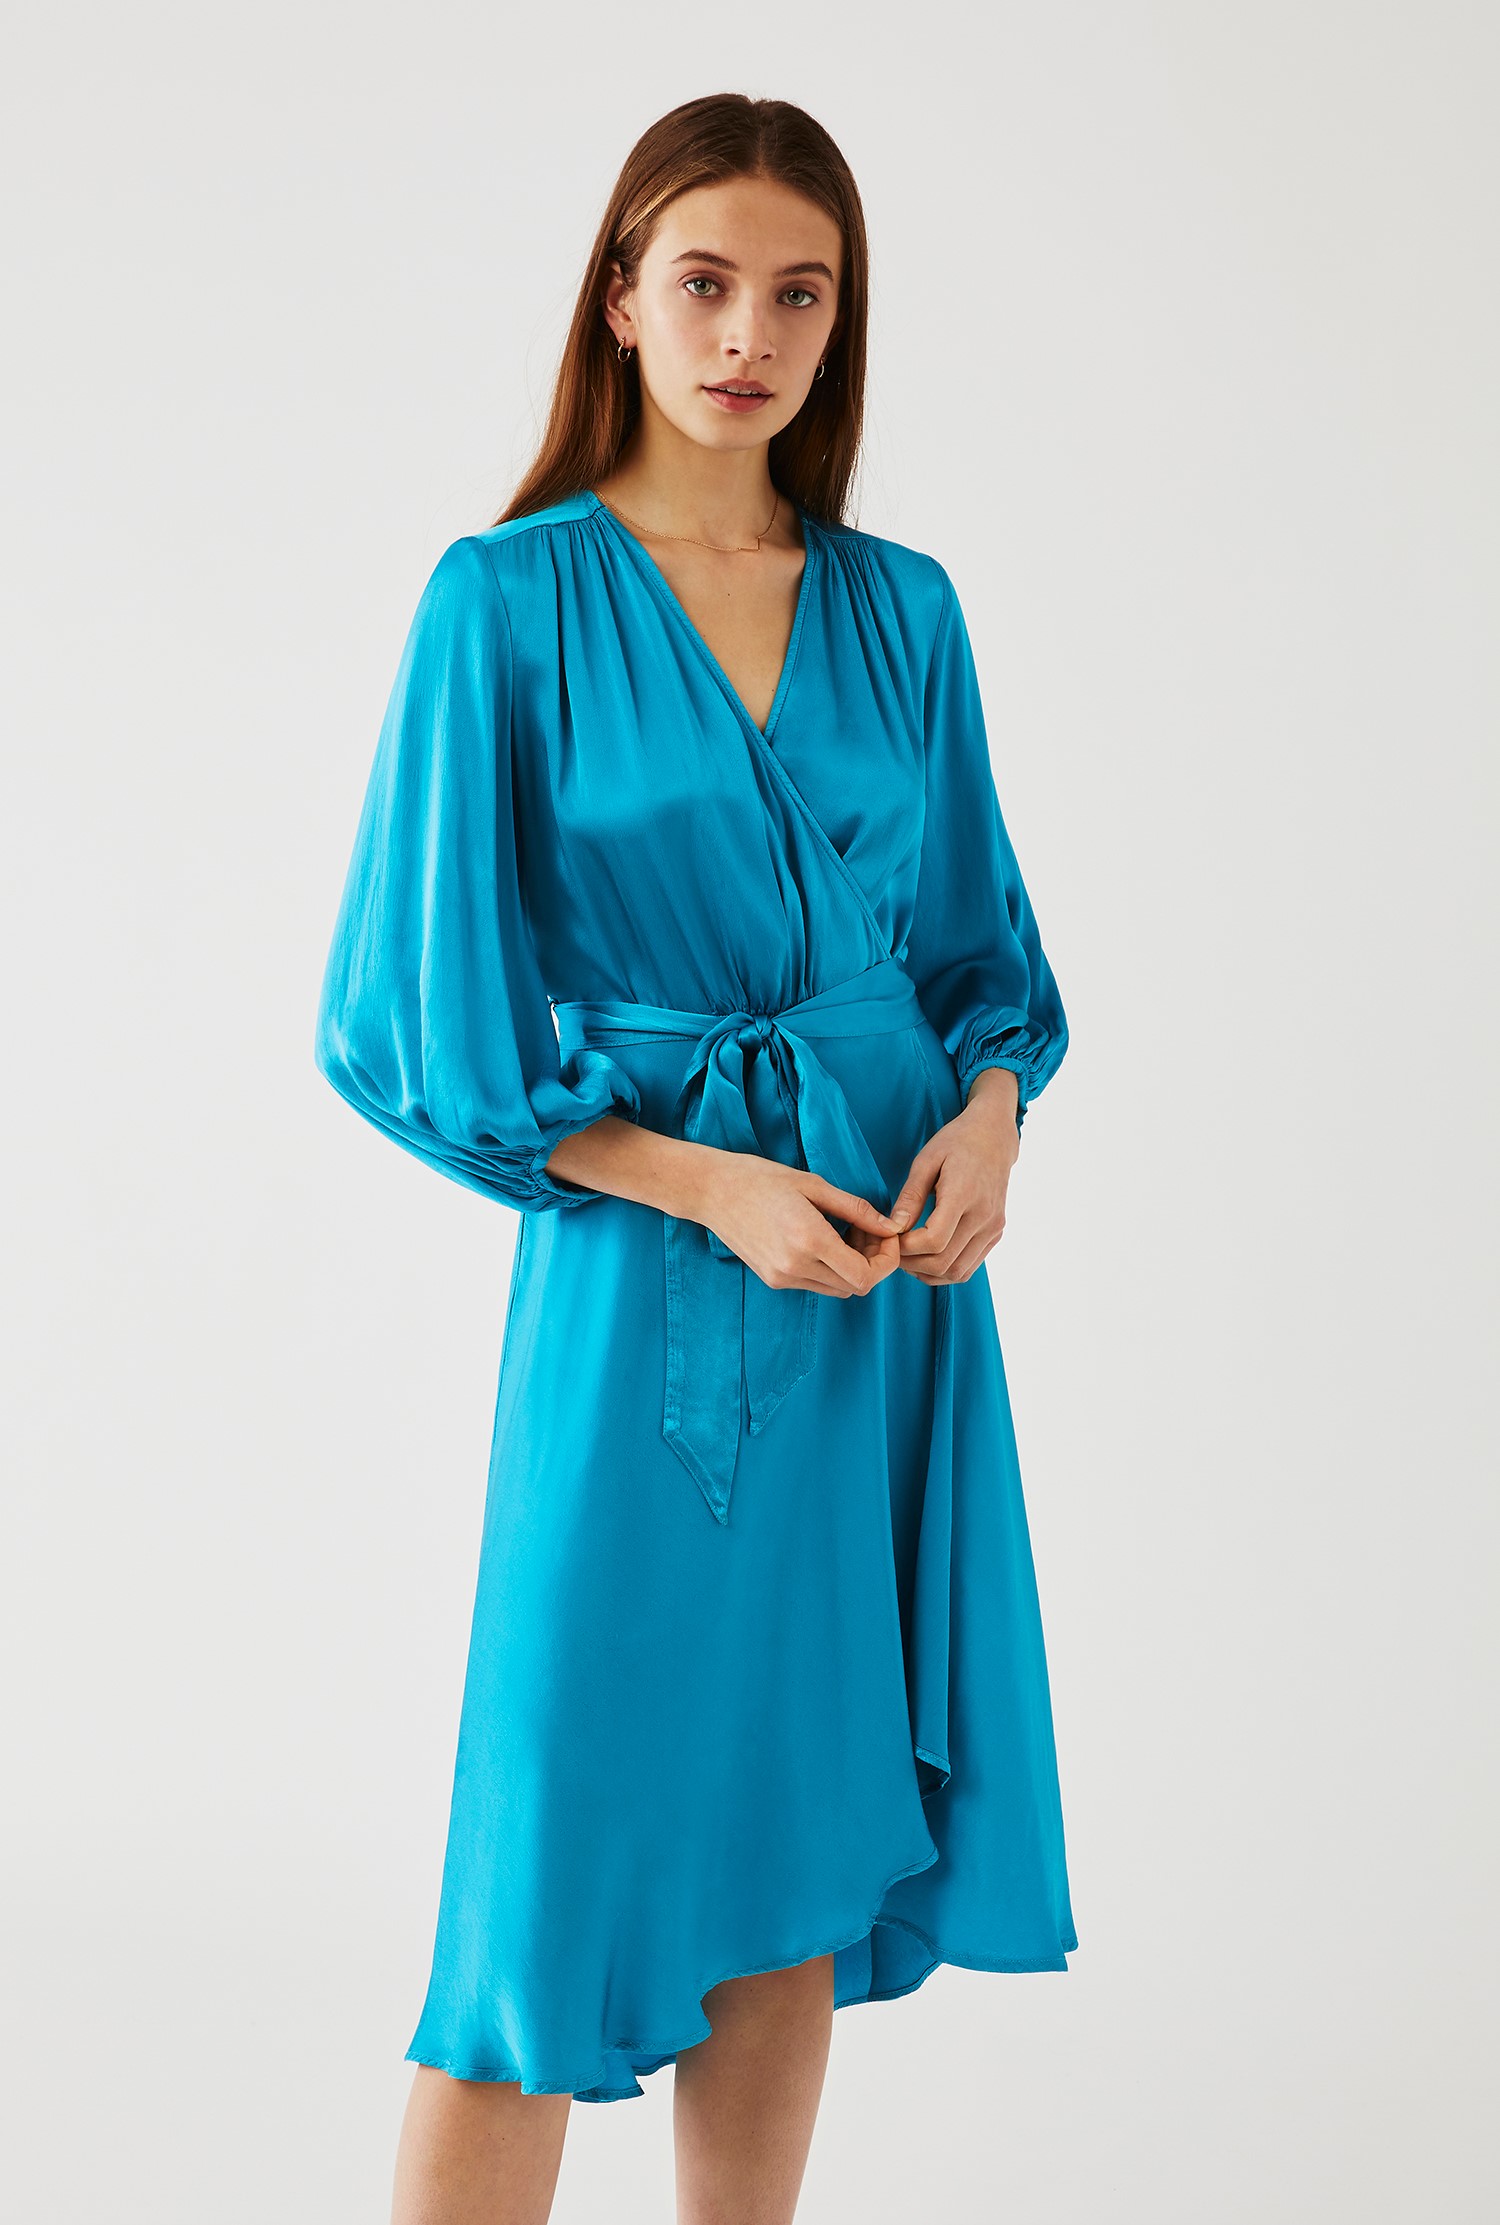 Aggie Blue Satin Wrap Dress with Sleeves | Ghost London